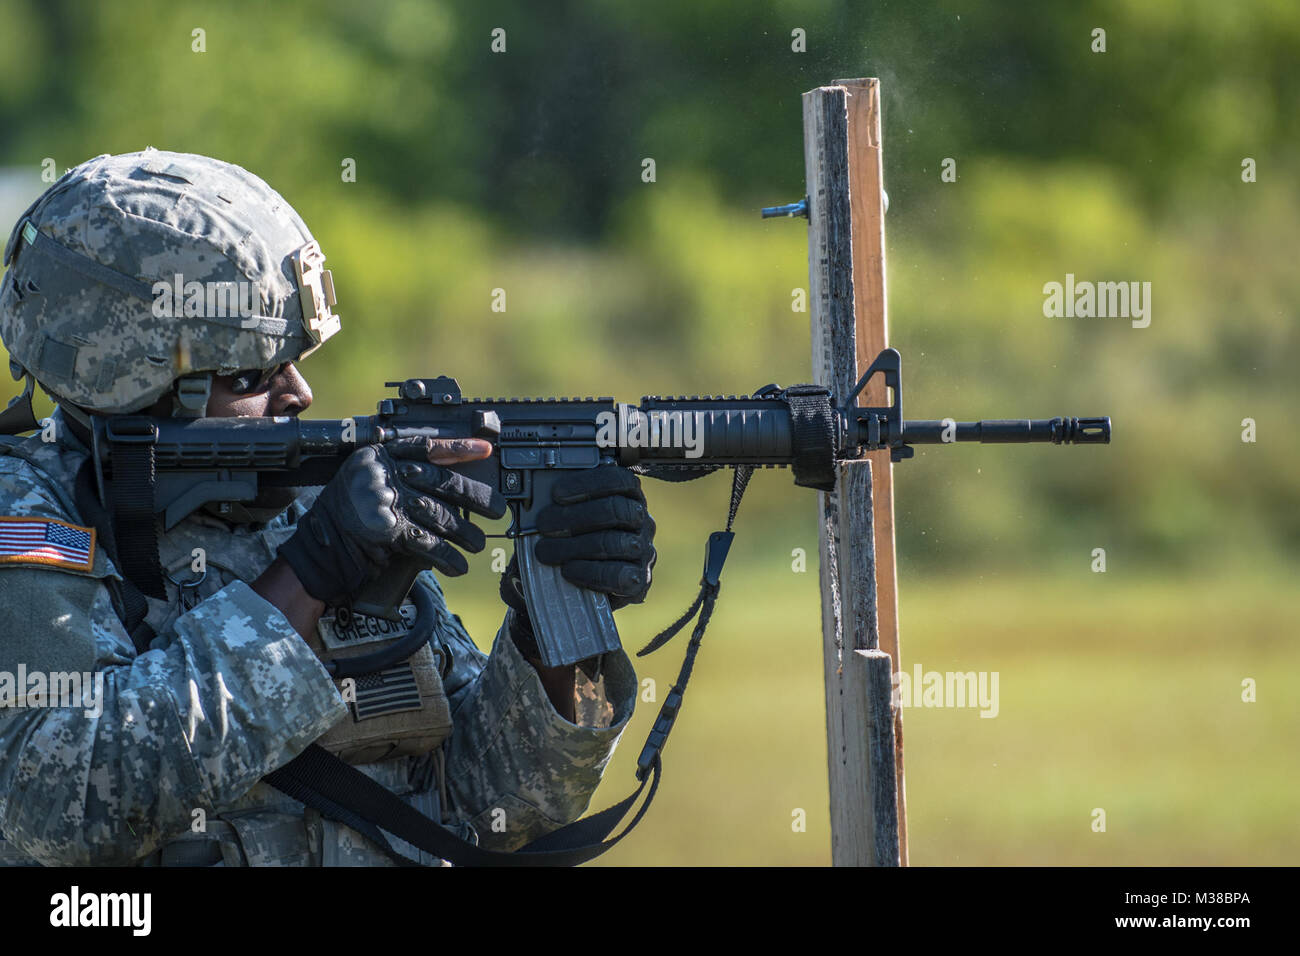 Sgt. Tookie Gregoire a combat engineer with the 251st Engineer Company (Sapper) positions his M4 Carbine during a reflexive fire exercise at Canadian Forces Base Gagetown in New Brunswick, Canada, August 14th, 2017. The reflexive fire range tests the Soldiers on their ability to shoot from various firing positions while moving from target to target in a tactical manner. 170814-Z-JY390-4 by Maine Army National Guard Stock Photo